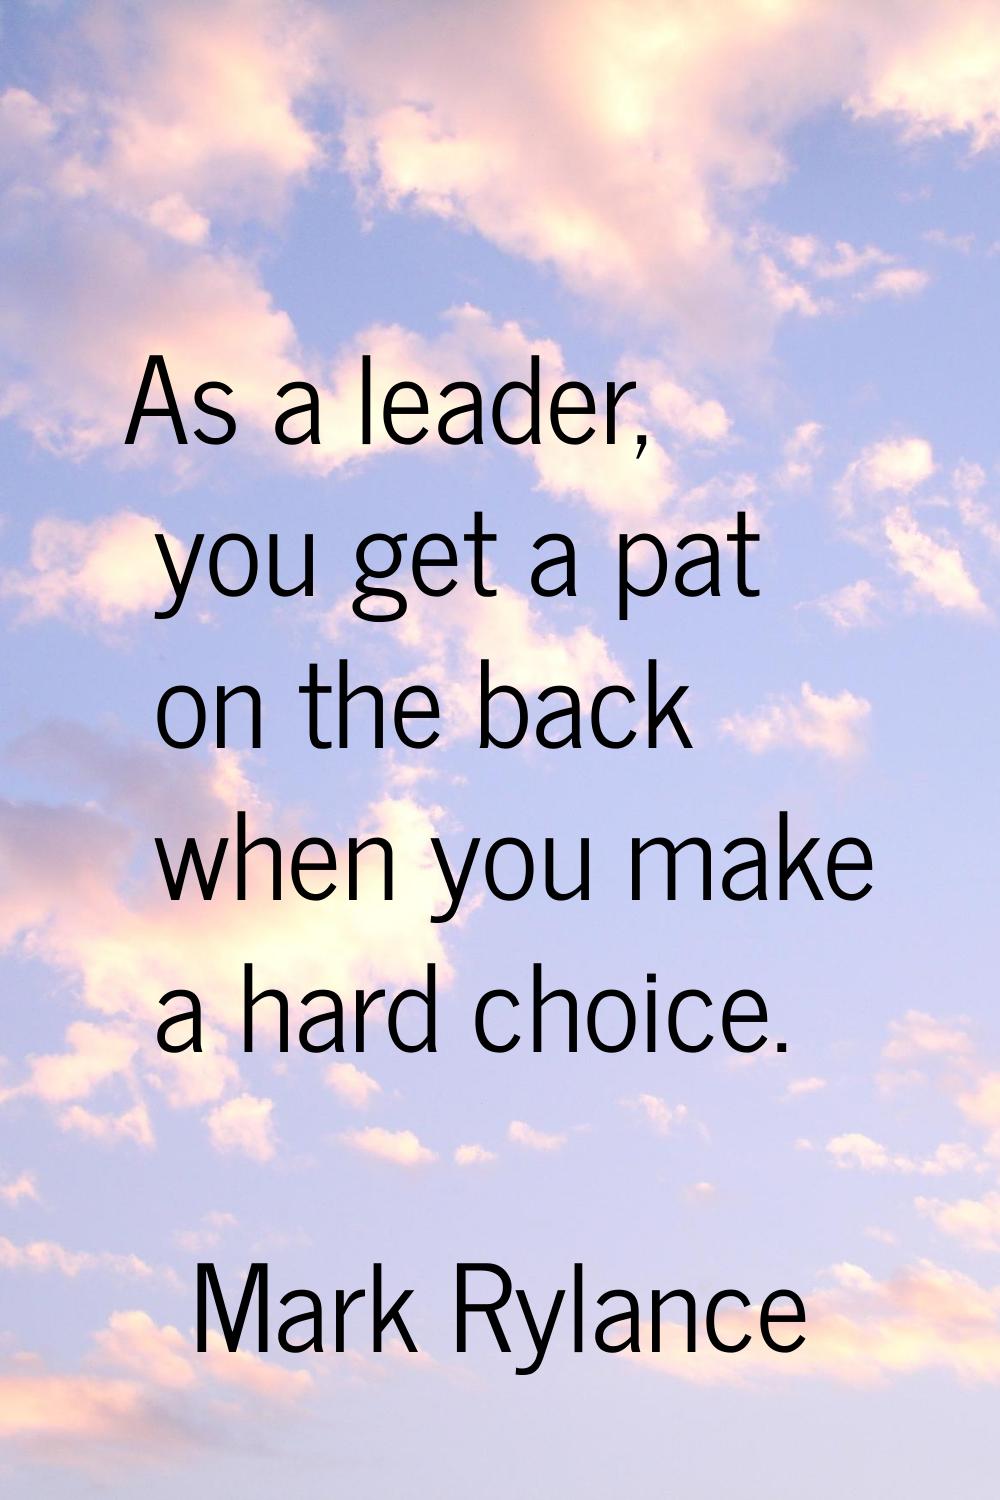 As a leader, you get a pat on the back when you make a hard choice.